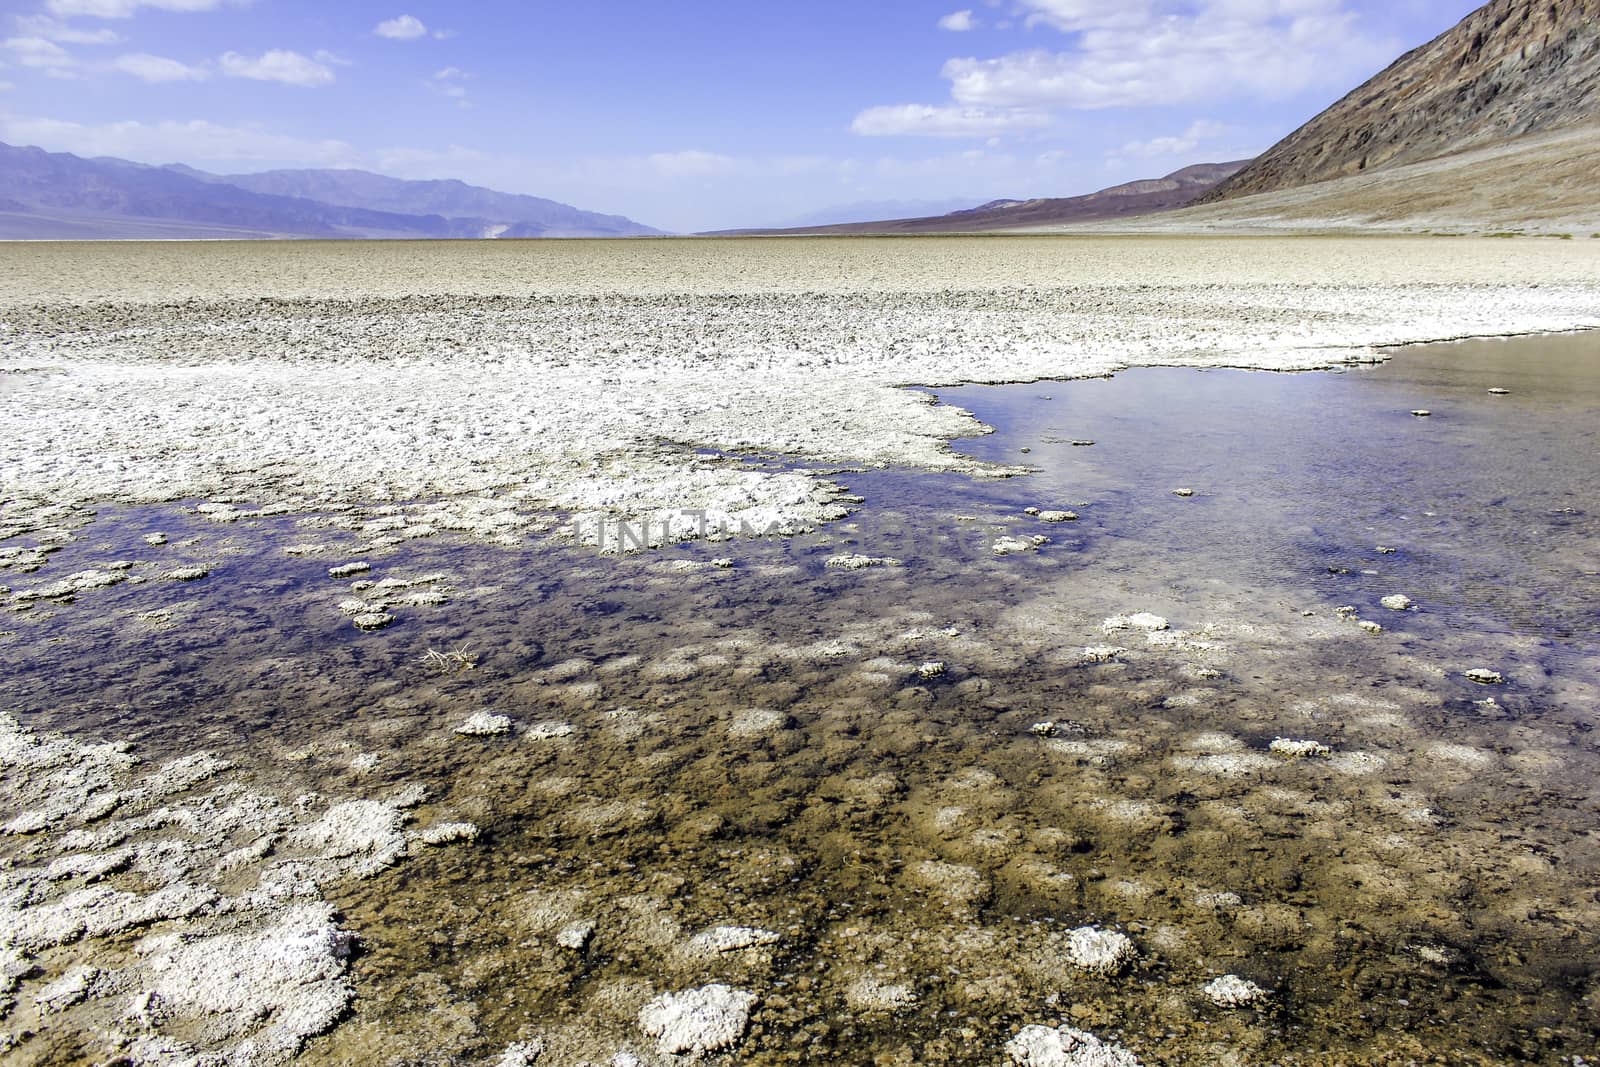 A pool of water in the salt flats at Badwater Basin in Death Valley